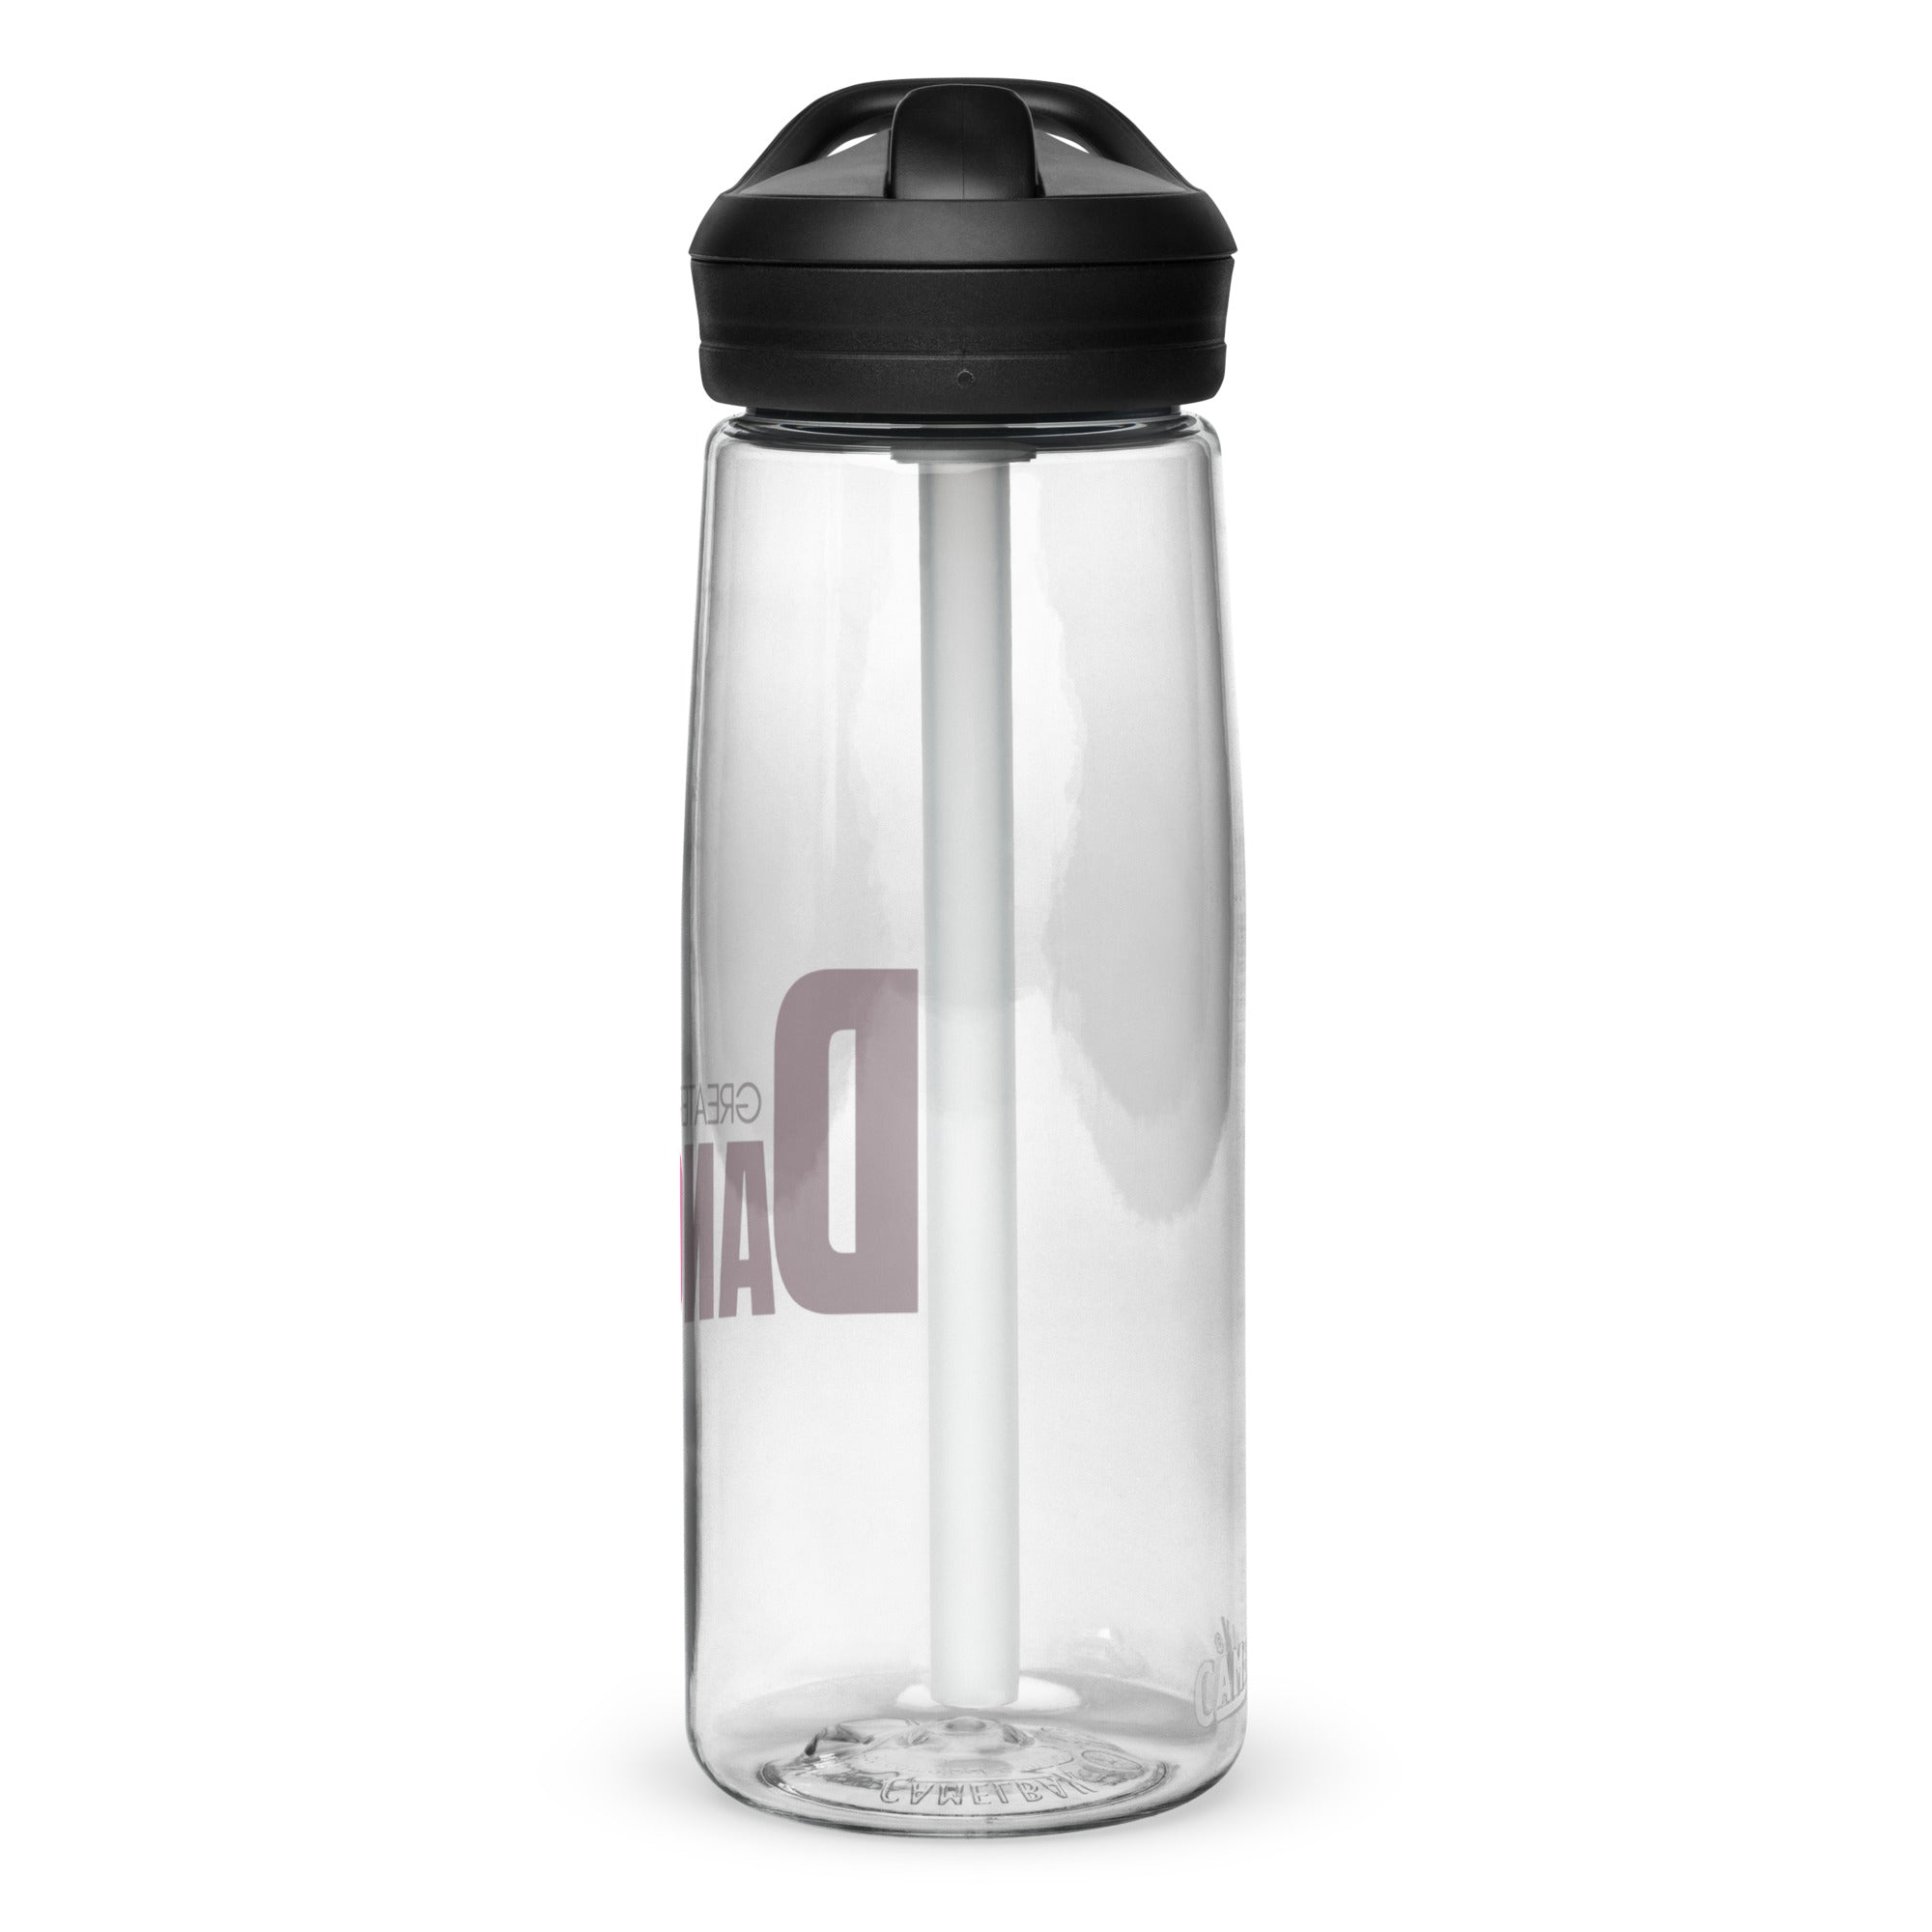 DIF/GYDSports water bottle